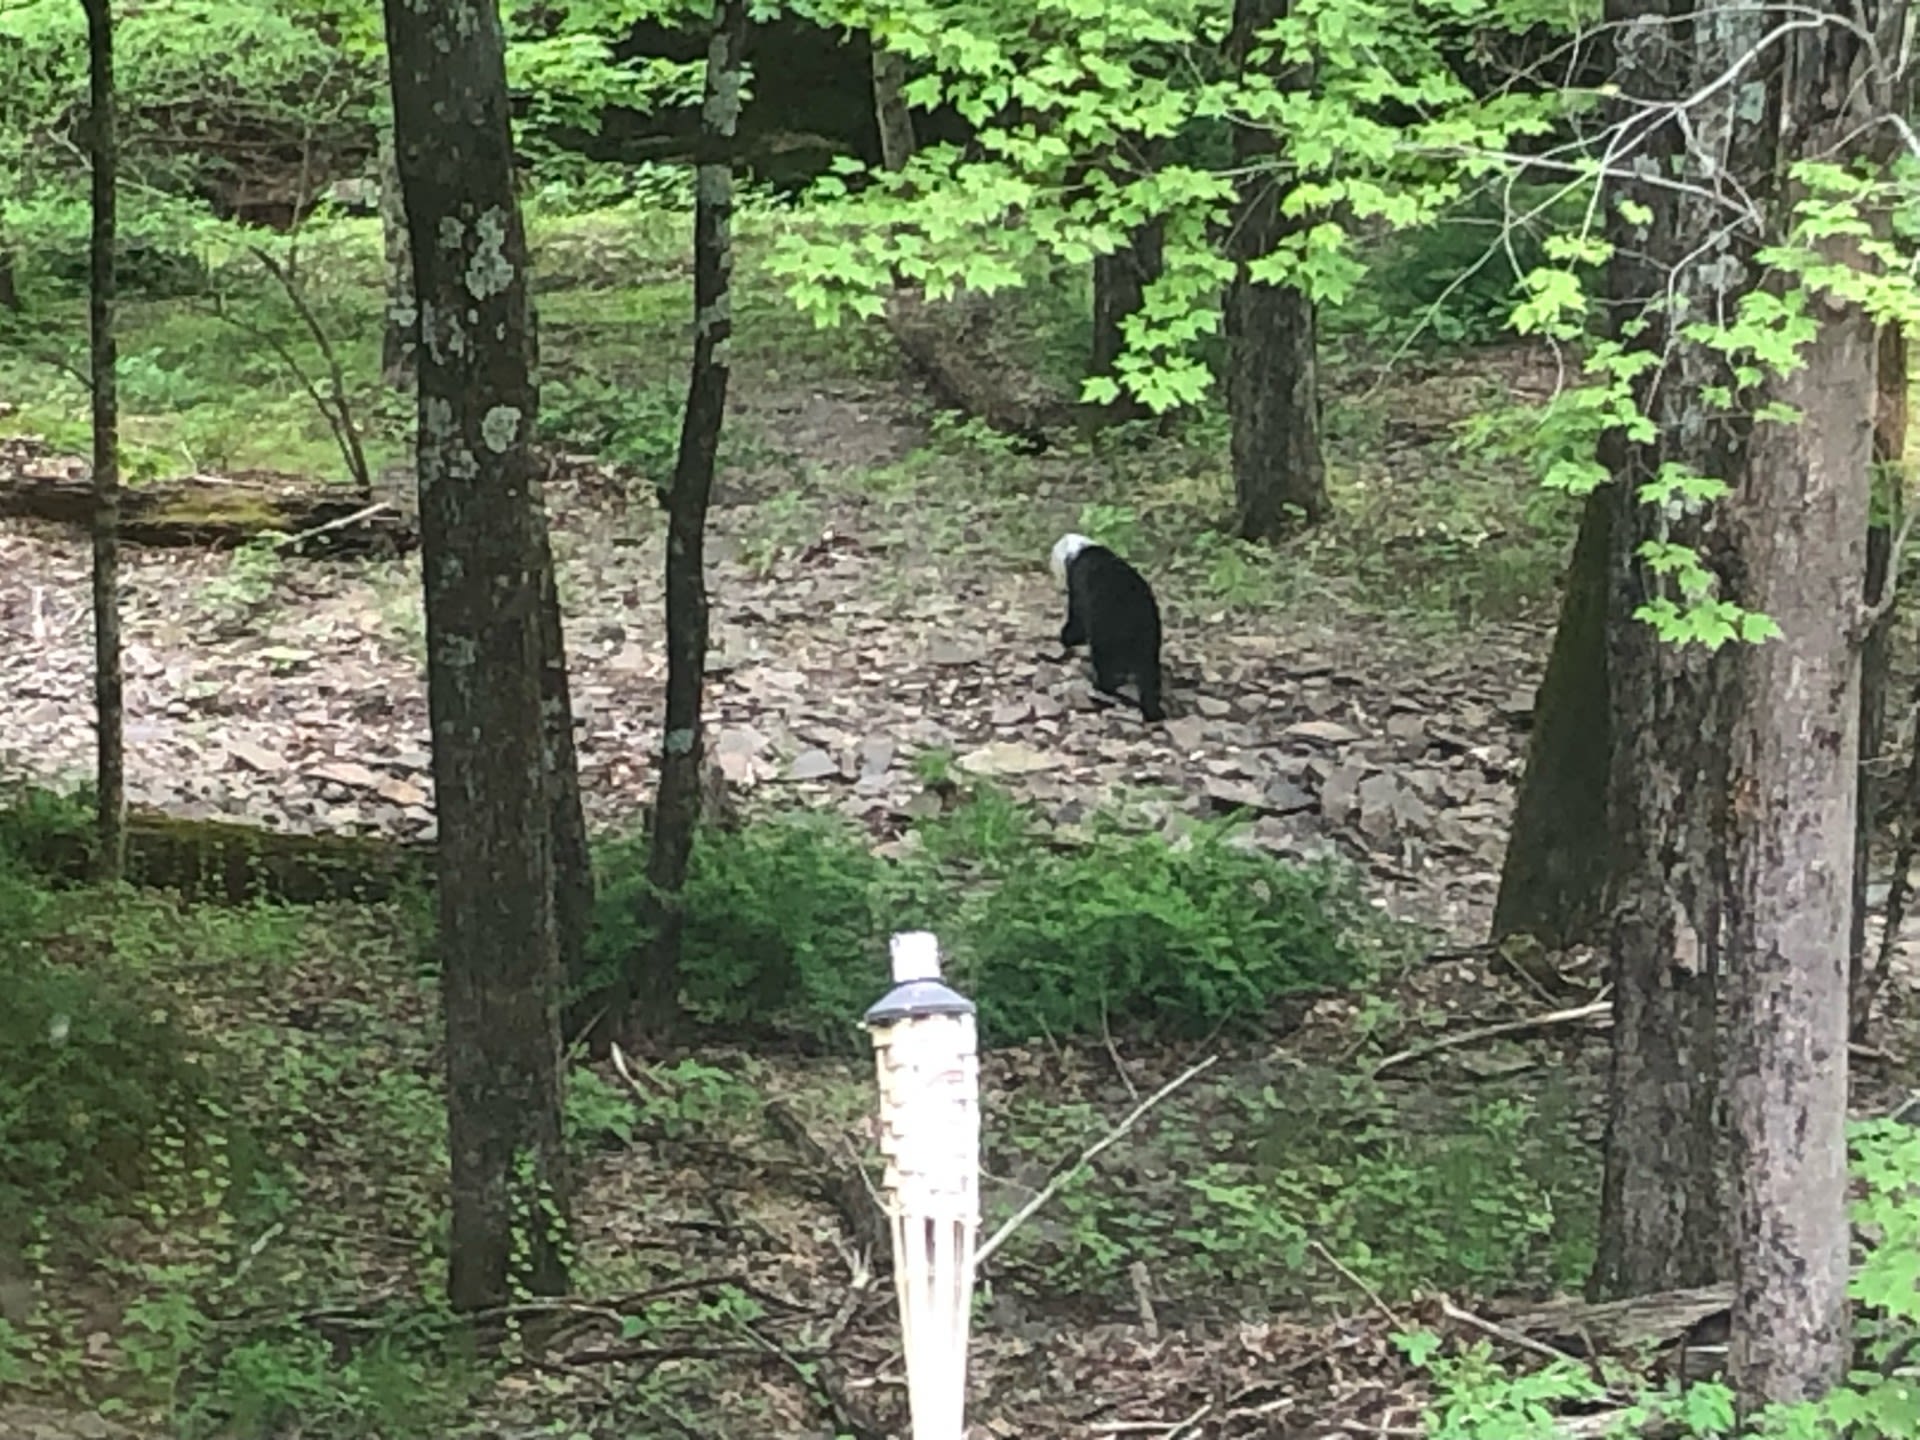 DEC searching for black bear seen near Saugerties with head stuck in container